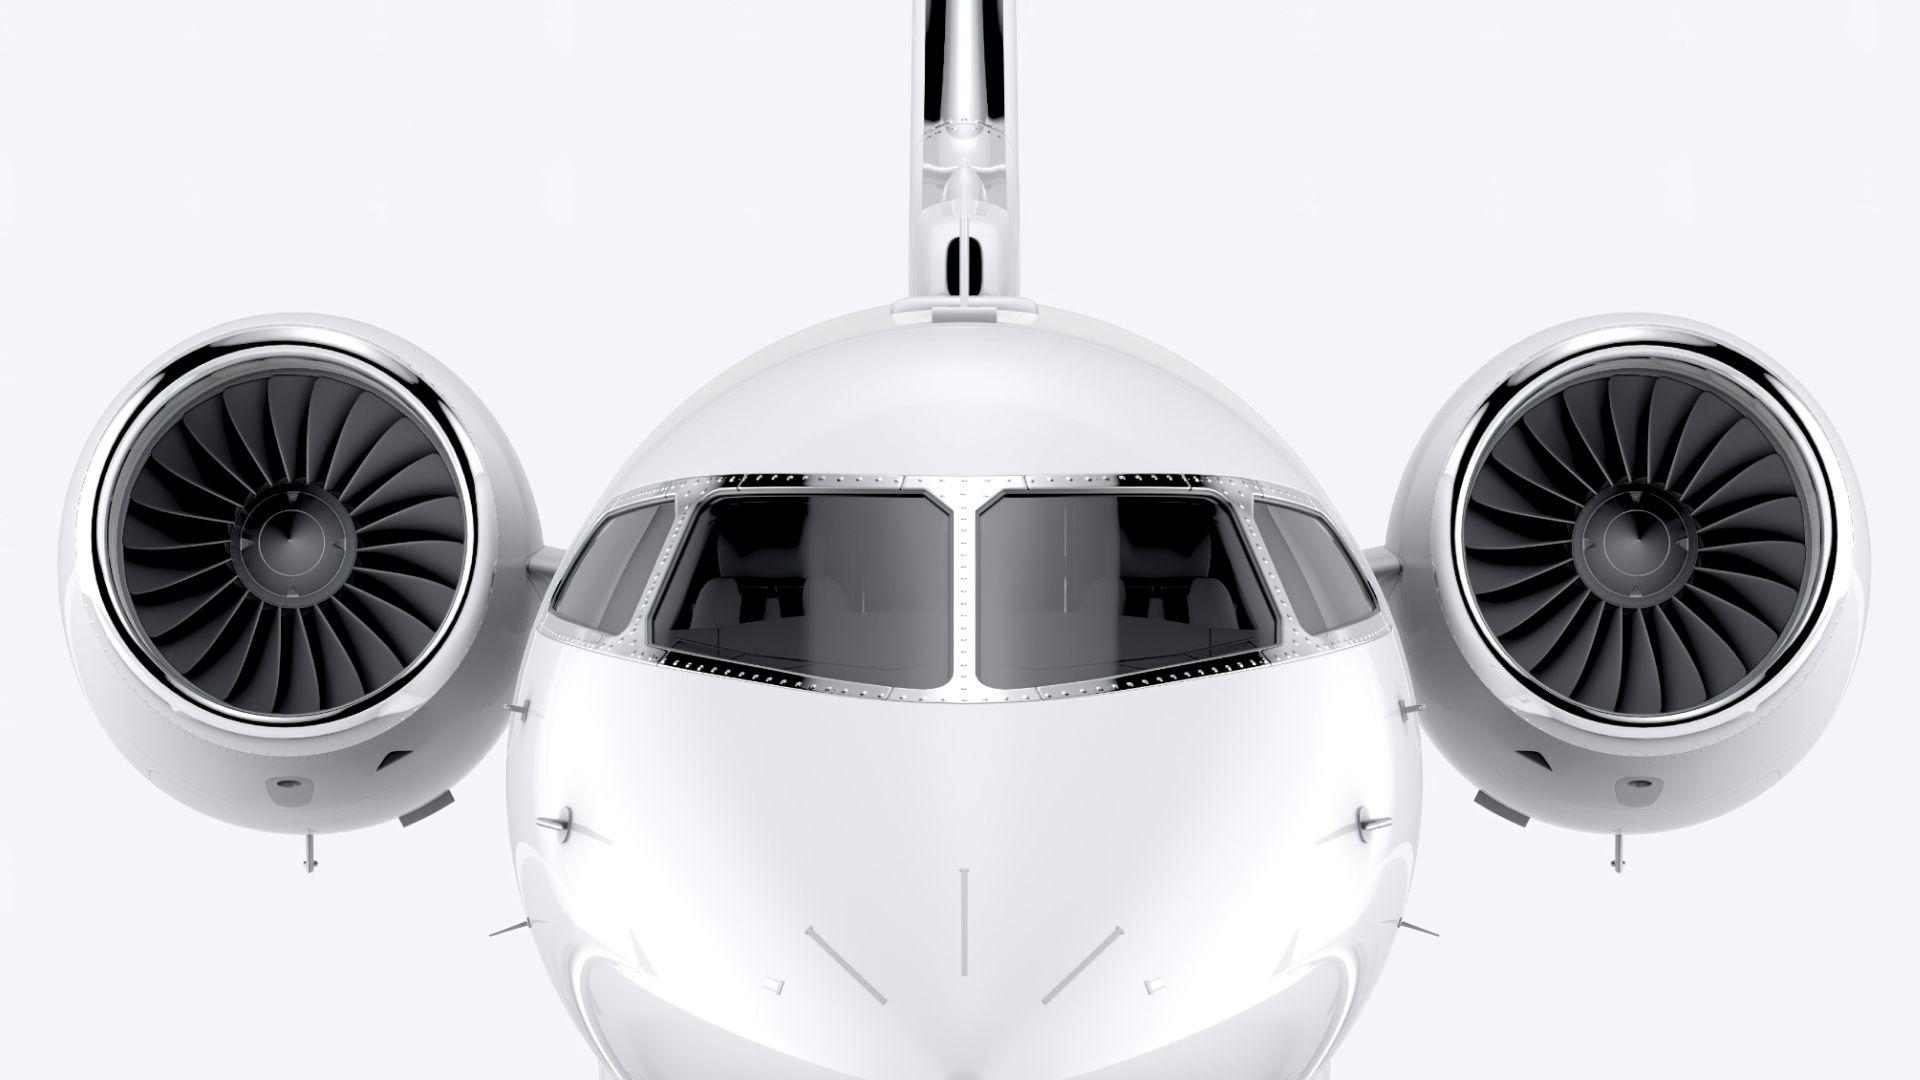 image-What-Makes-XO-The-Worlds-Premier-Private-Aviation-Network